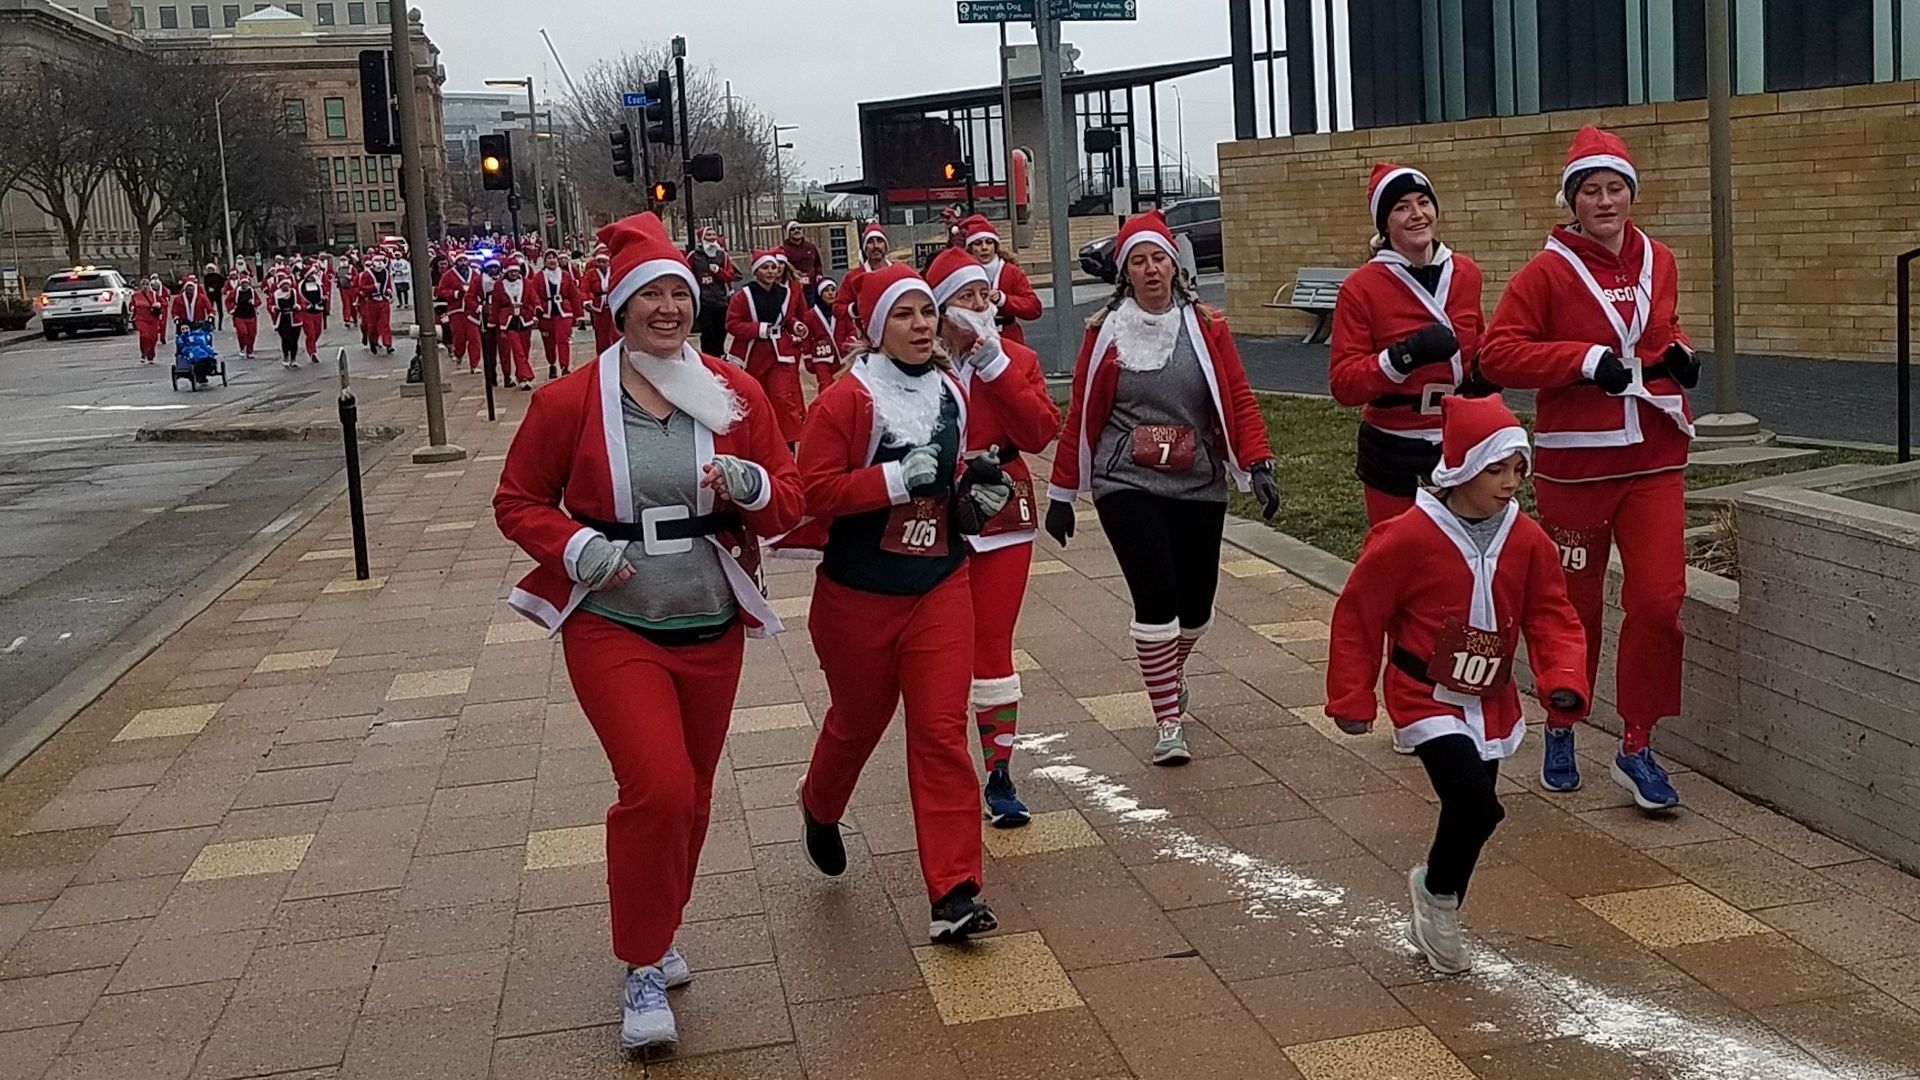 People dressed in Santa costumes and running